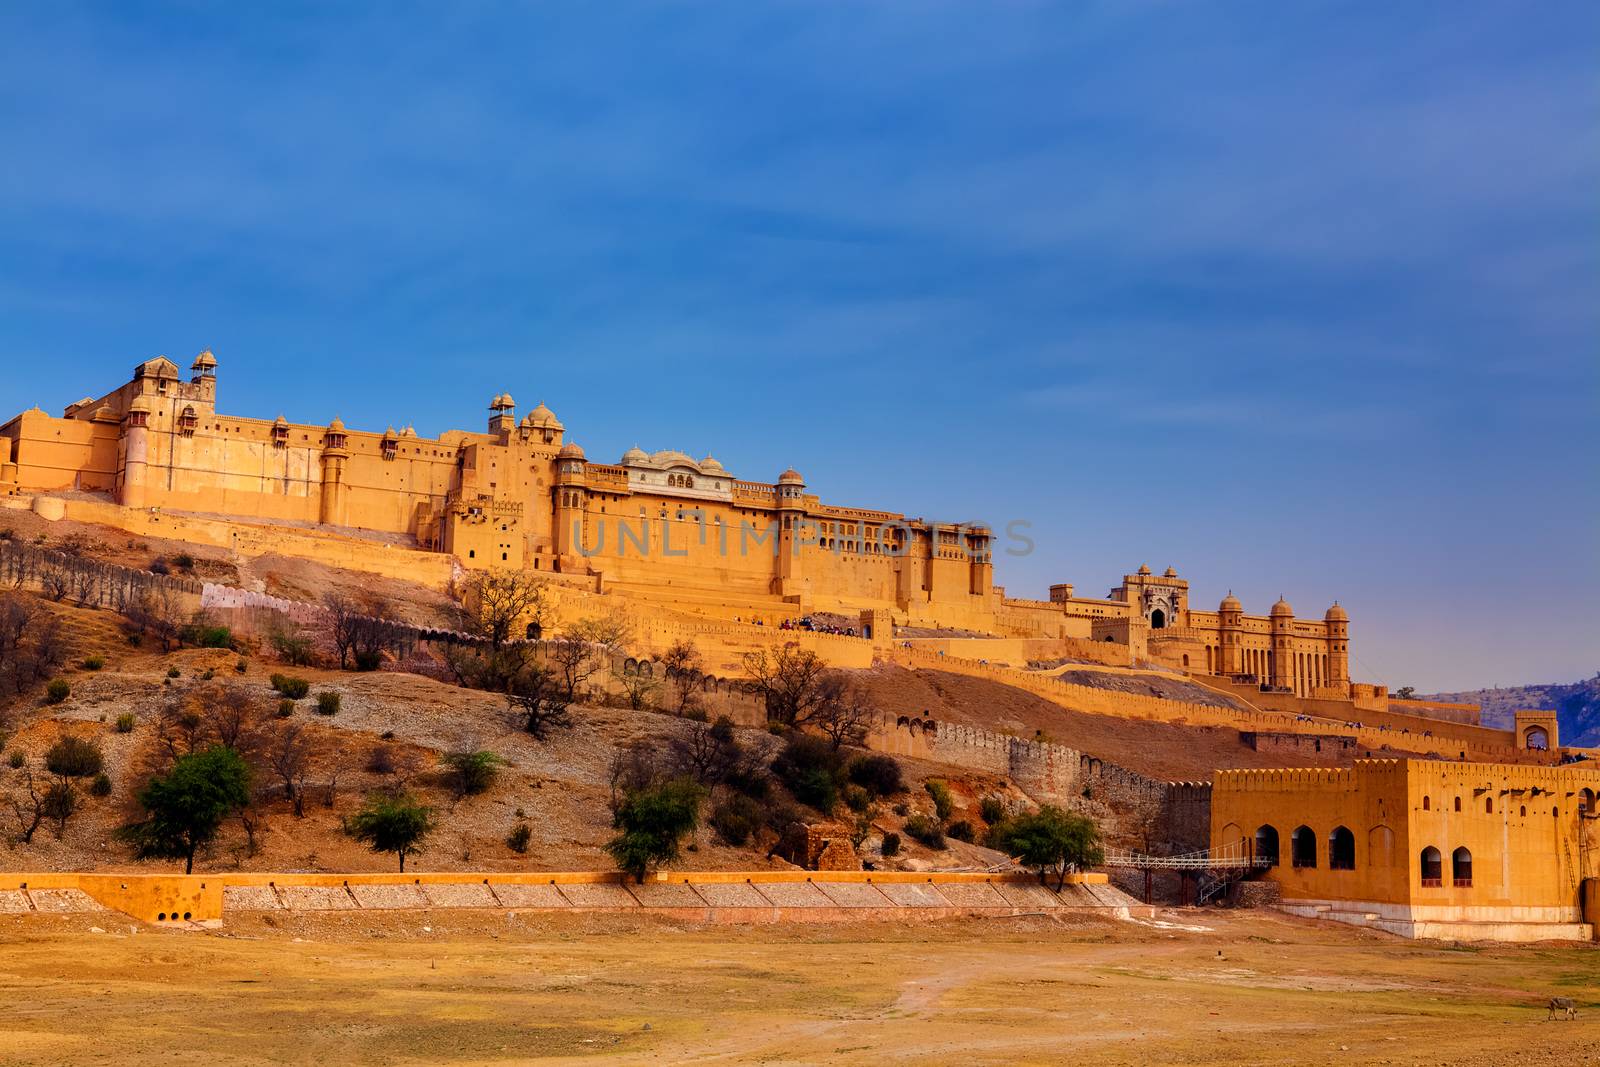 Amber Fort in jaipur in rajasthan state in india